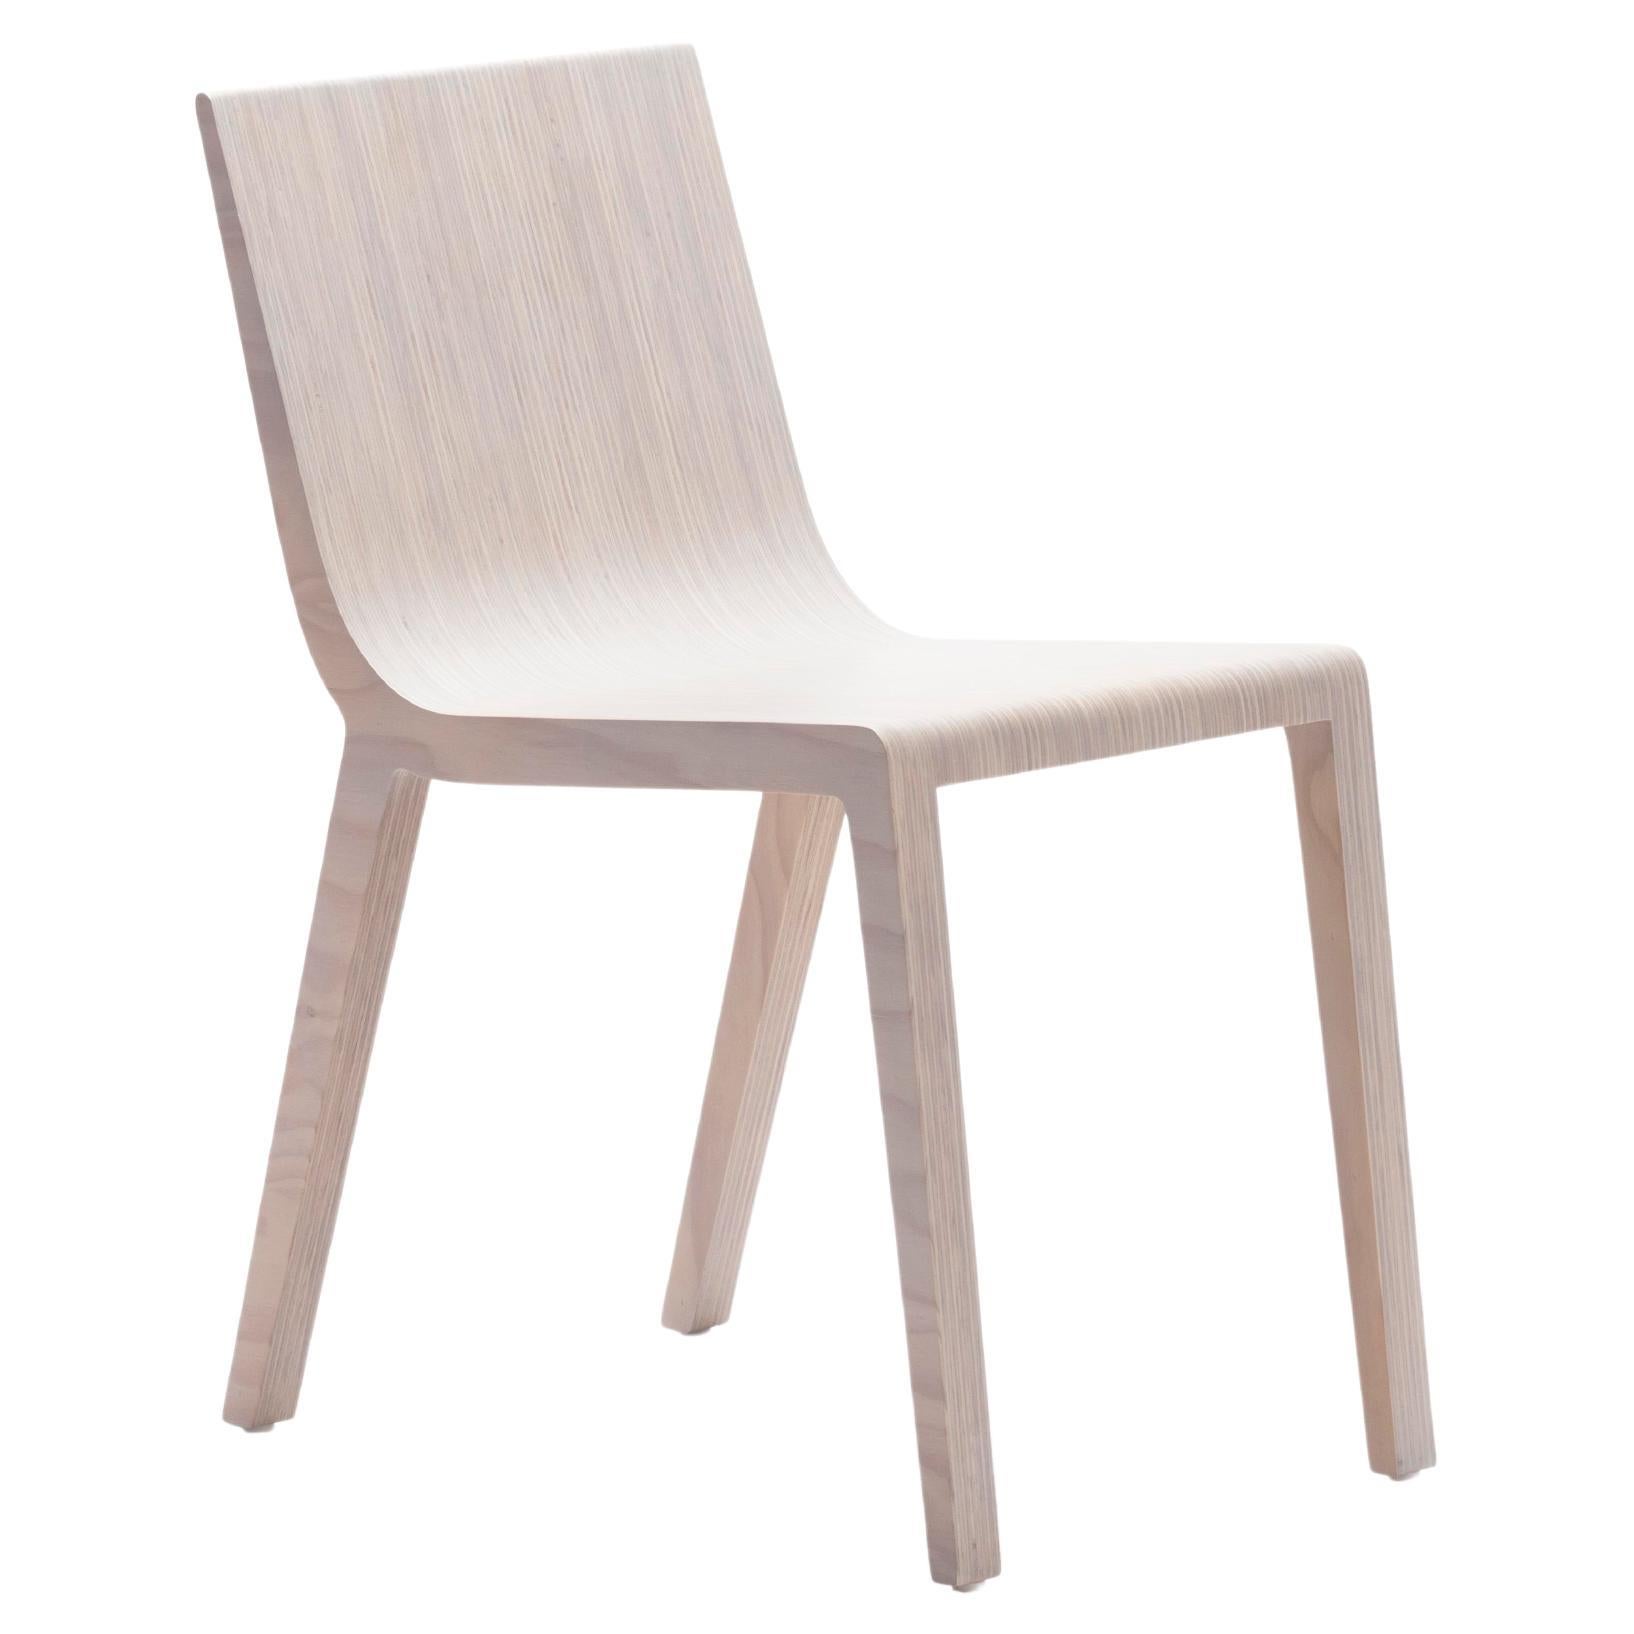 Y Chair by Piegatto, a Contemporary and Minimalist Chair